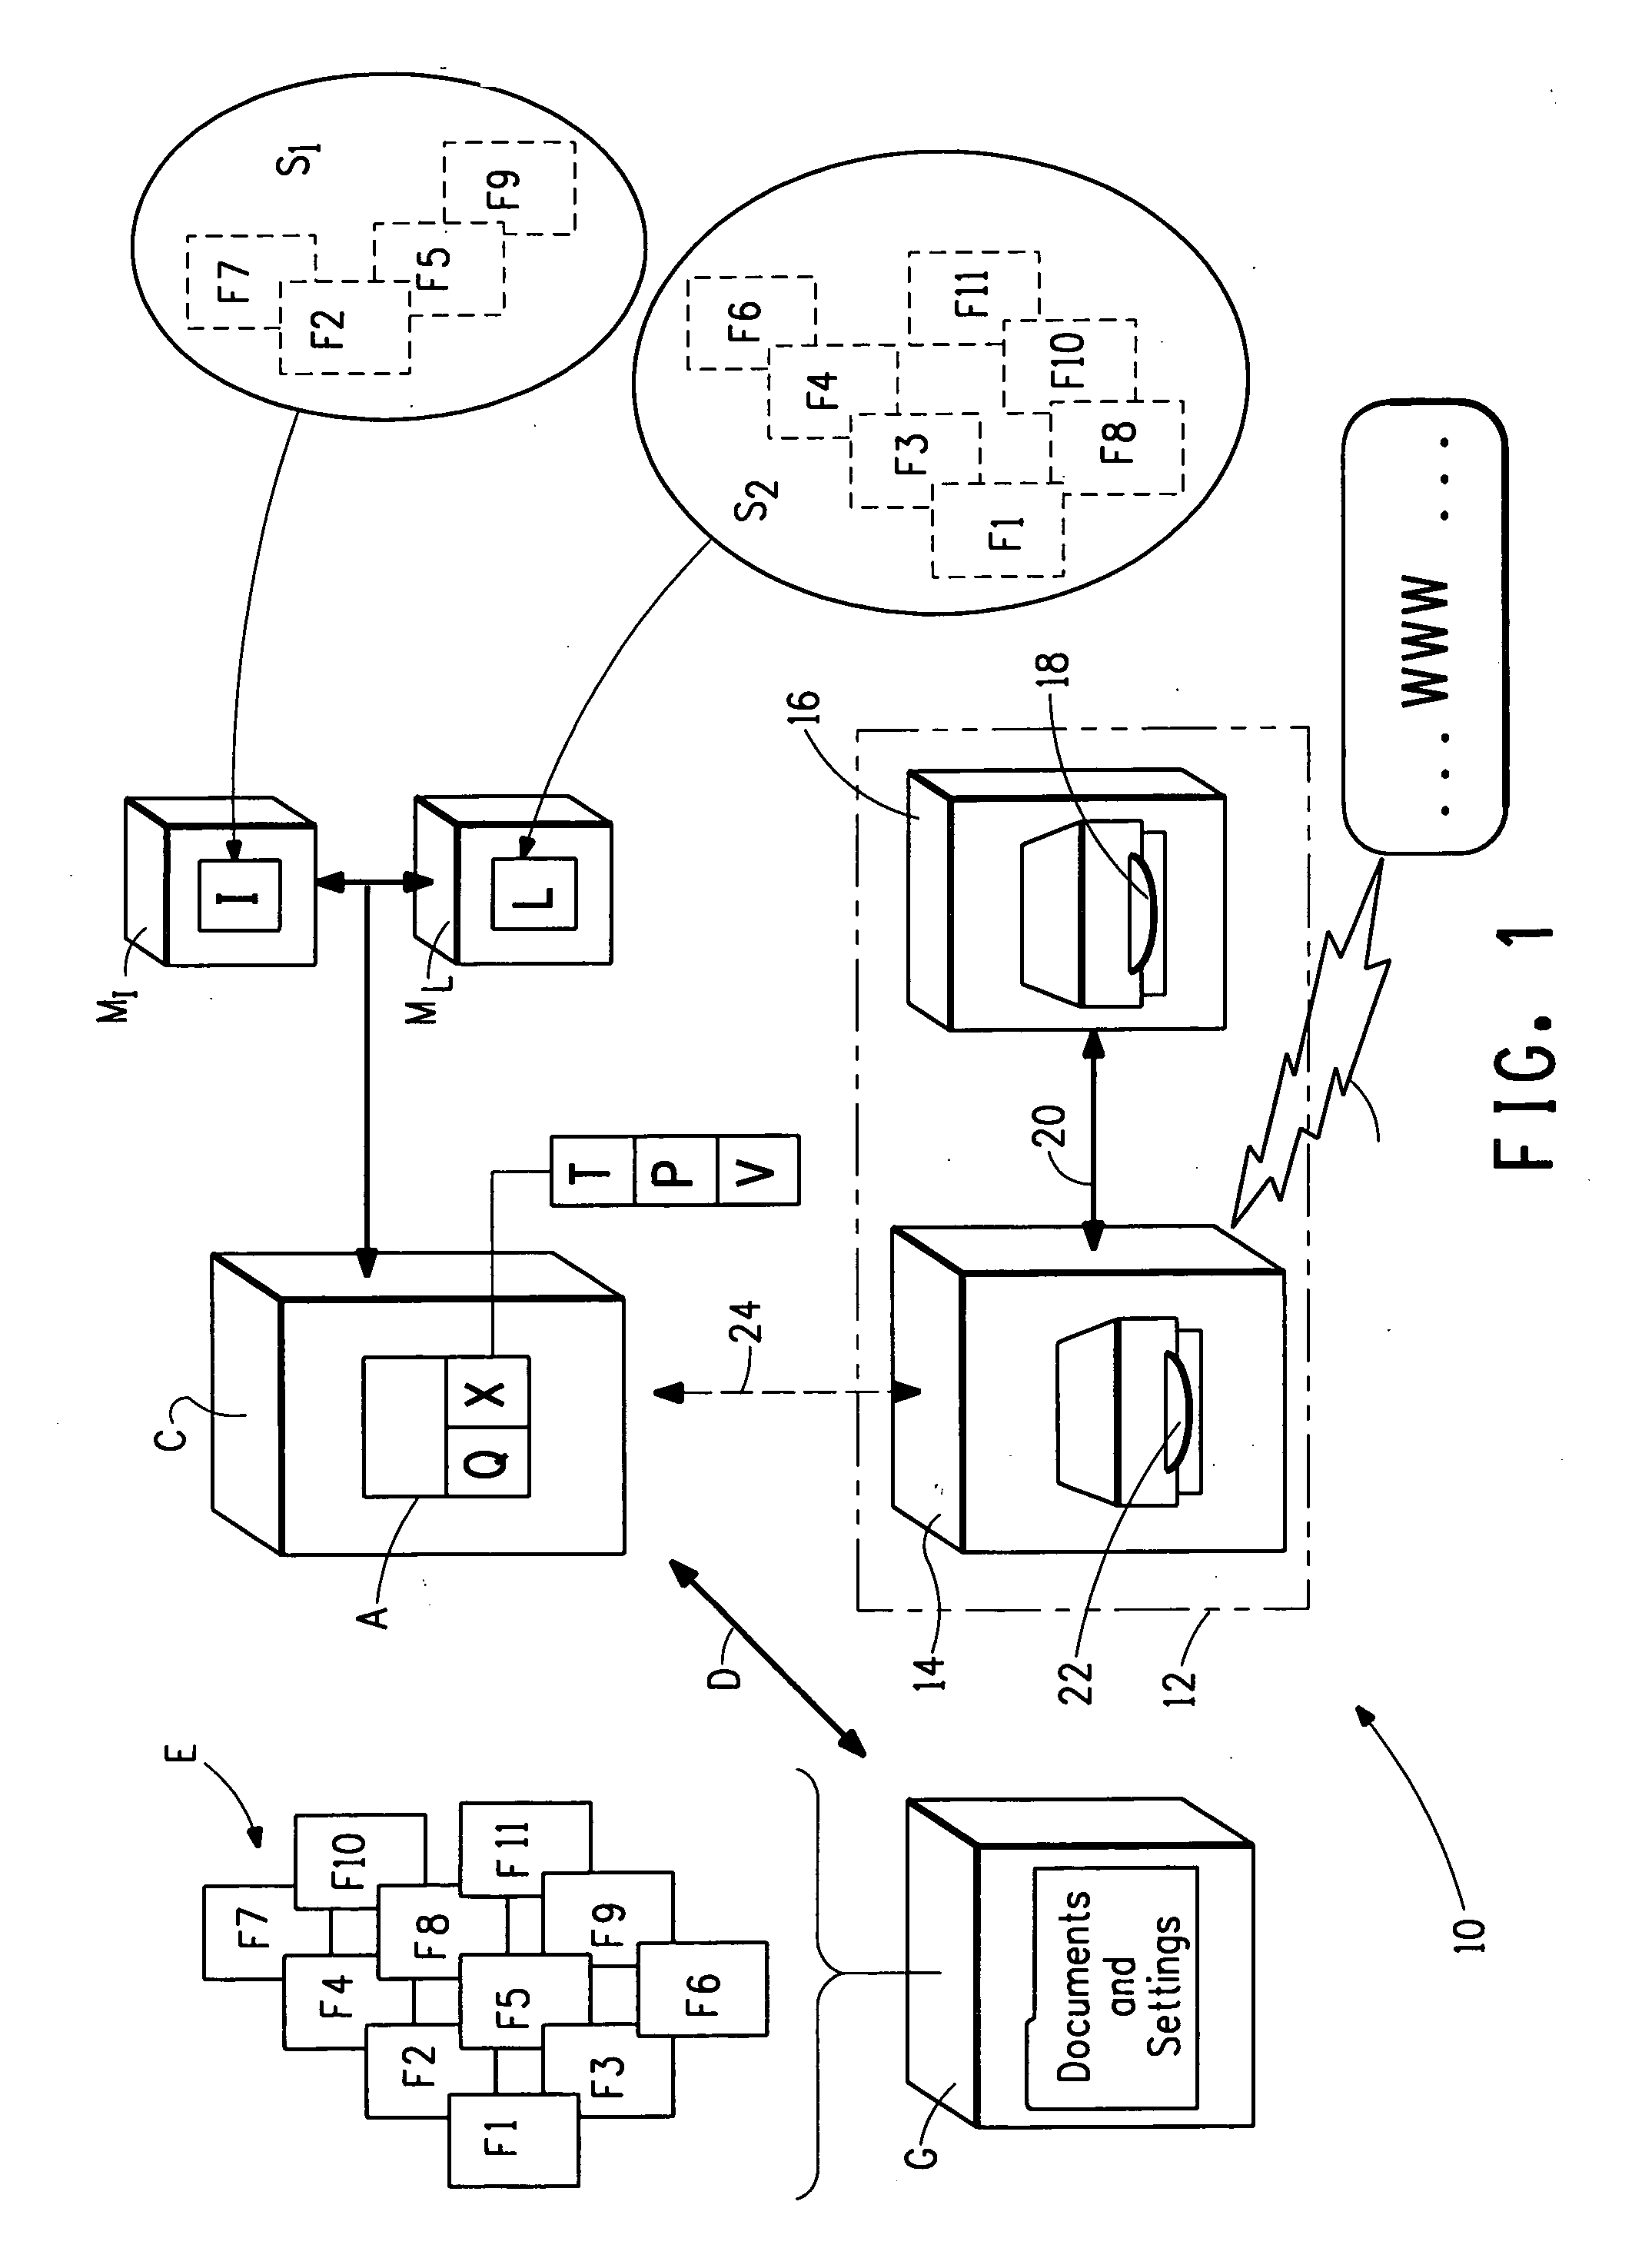 Data structure generated in accordance with a method for identifying electronic files using derivative attributes created from native file attributes